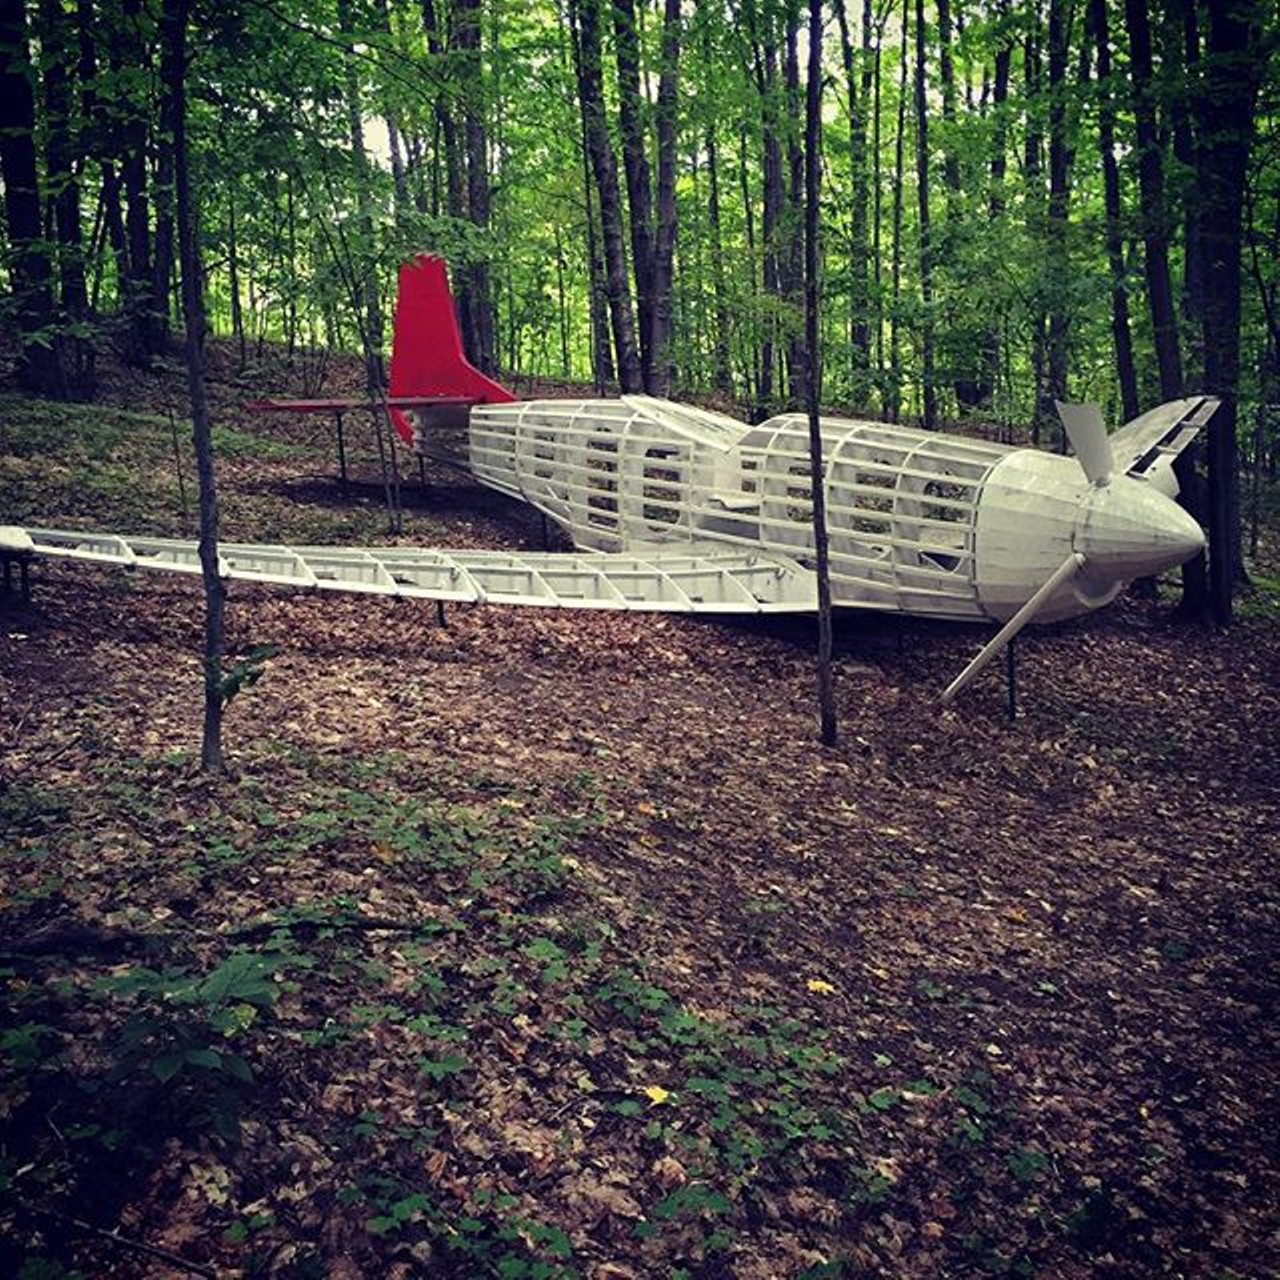 Michigan Legacy Art Park, Thompsonville
The art park is 30 acres of sculpture filled land including 1.6 miles of hiking trails to explore manmade and natural beauty. (Photo via Instagram, @schuster671)